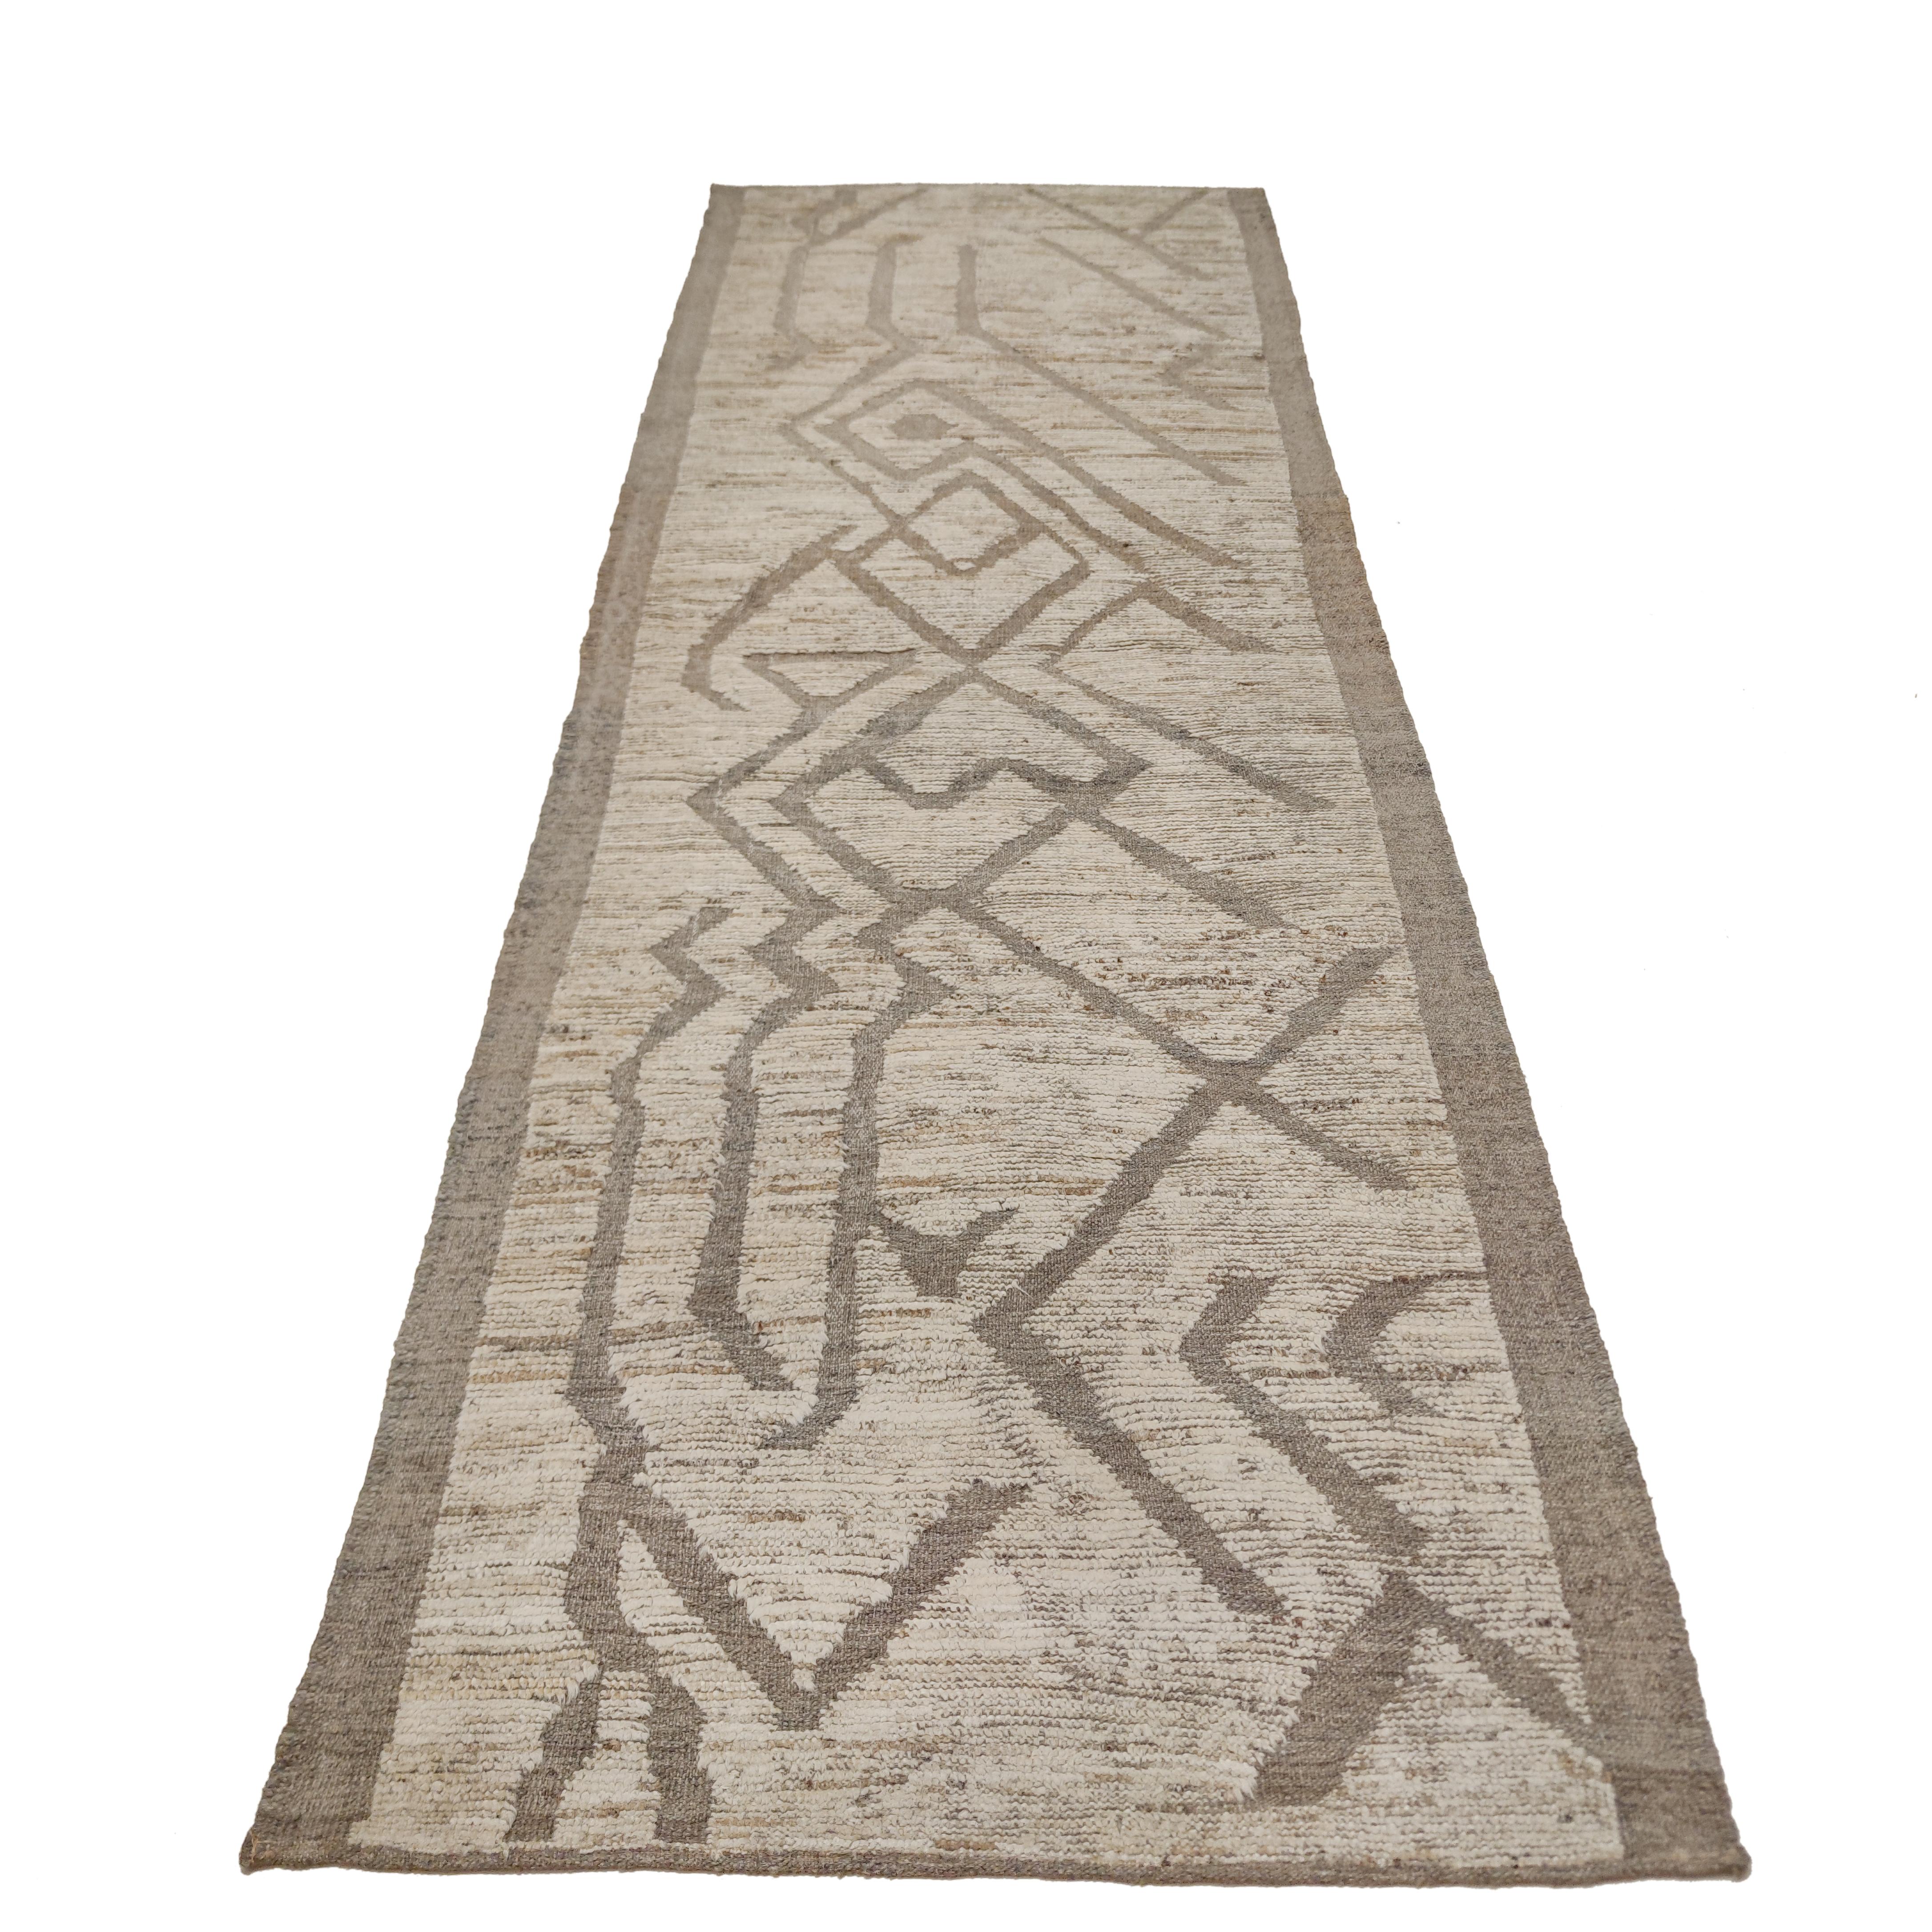 Showa Modernist Textured Moroccan Style Kuba Runner Rug by Alberto Levi Gallery For Sale